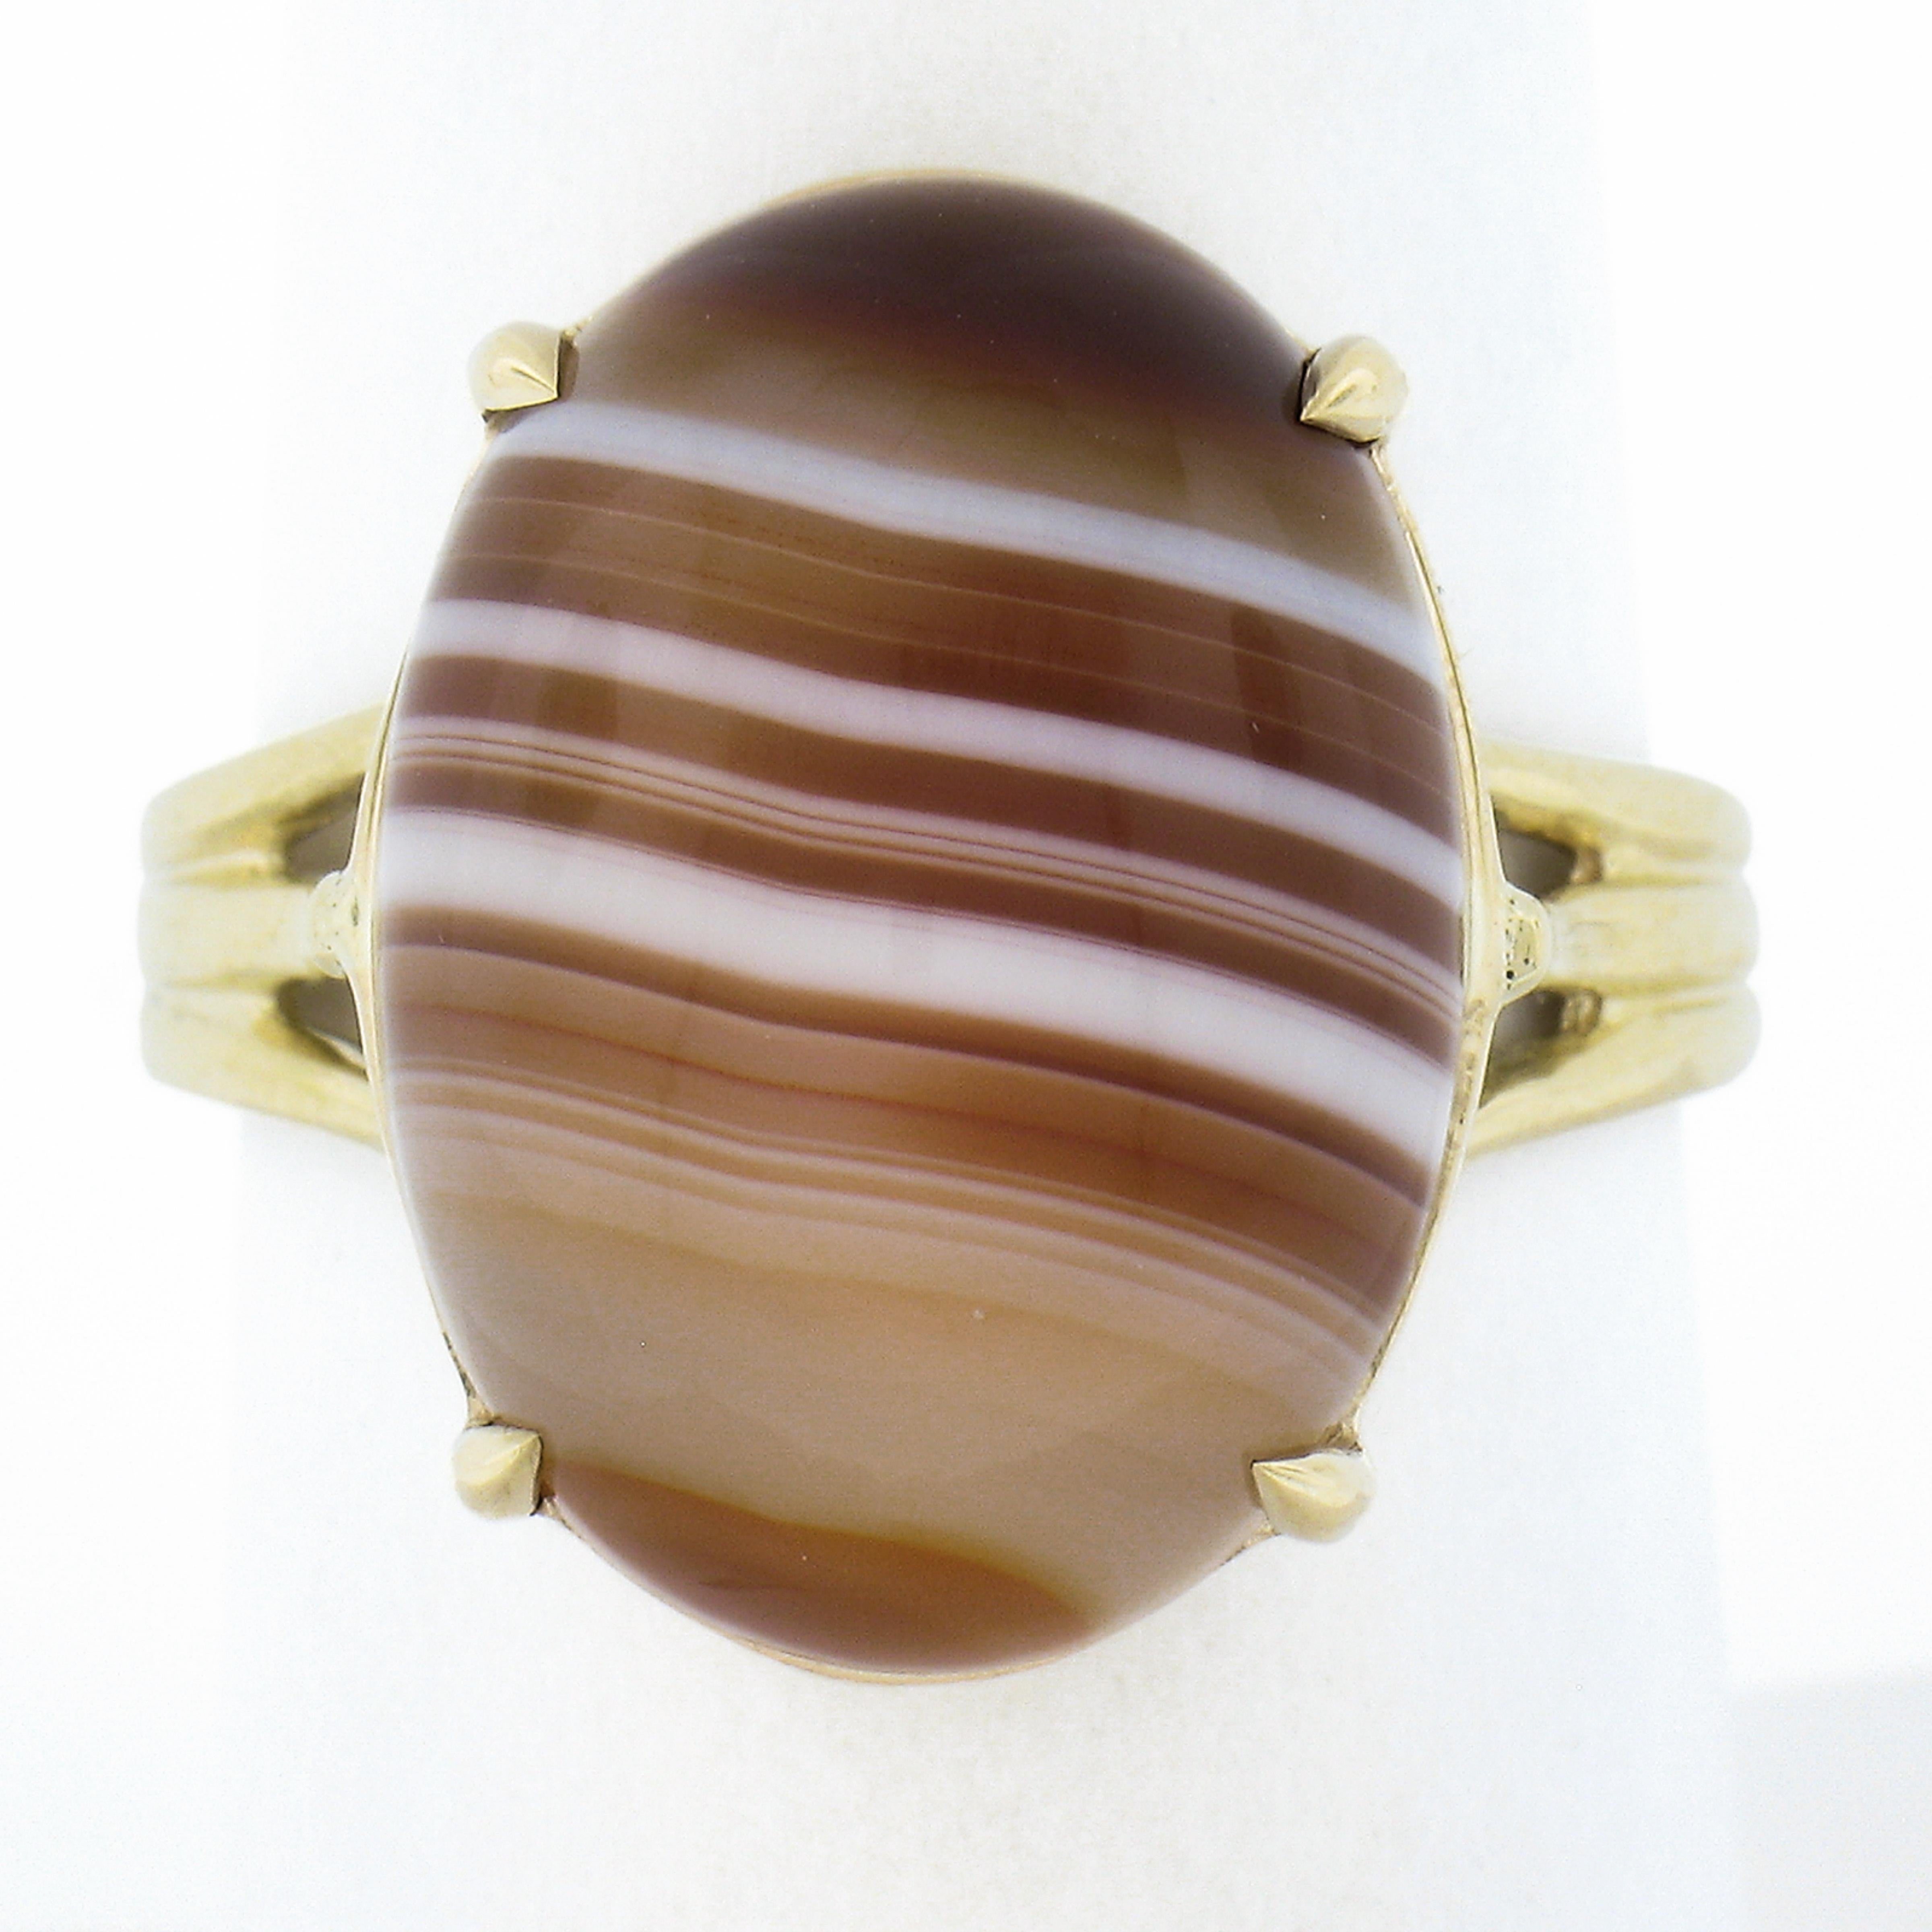 This new classy solitaire ring was crafted in solid 14k yellow gold features an oval cabochon banded agate neatly claw prong set at its center. The agate shows a wonderful brown color with white lines. Enjoy :)

--Stone(s):--
(1) Natural Genuine